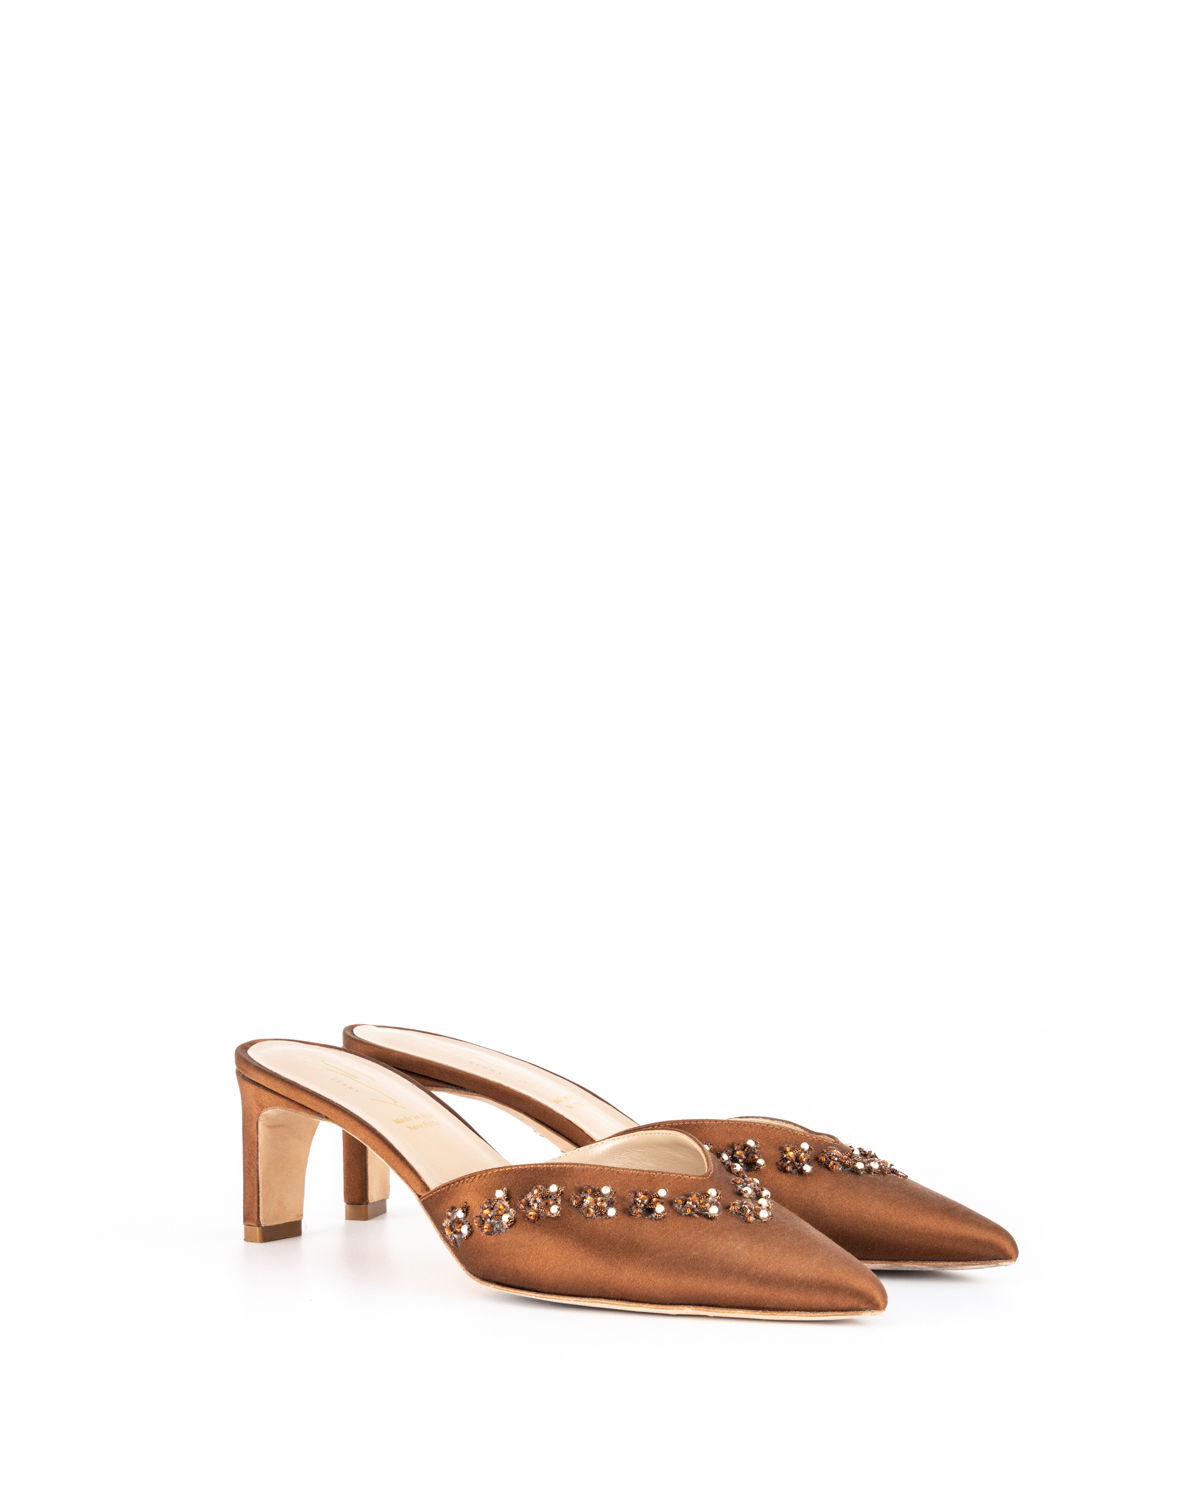 Brown satin pointed mules with rhinestones | Temporary Flash Sale | Genny